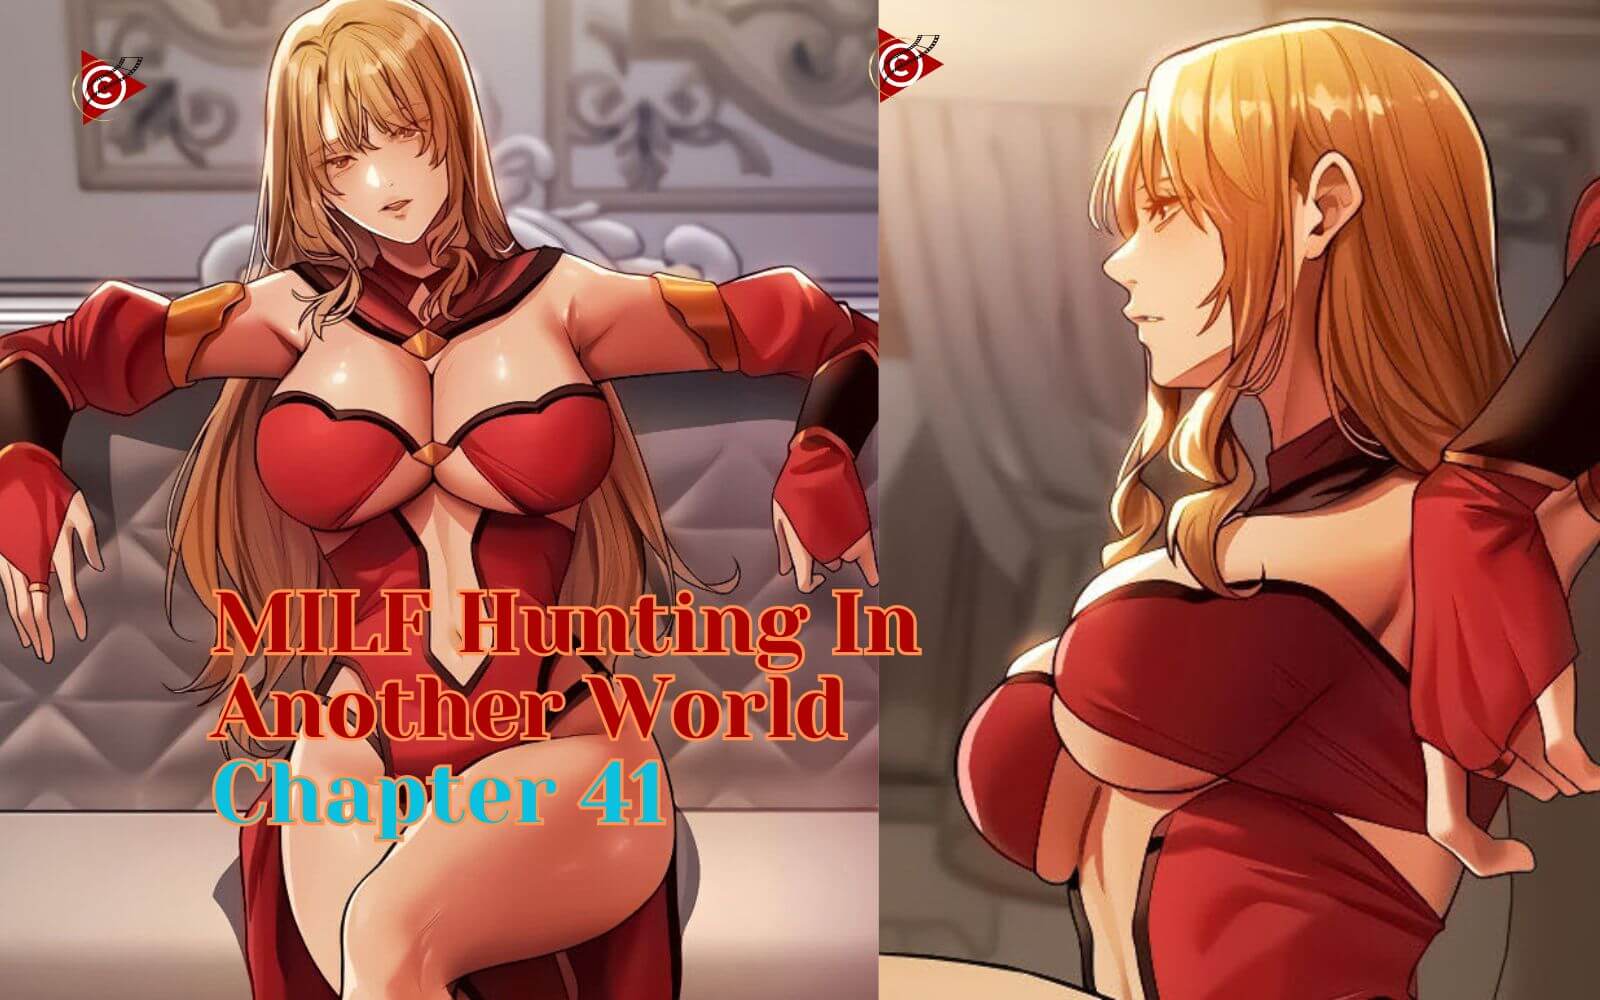 MILF Hunting In Another World Chapter 41 official Release Date